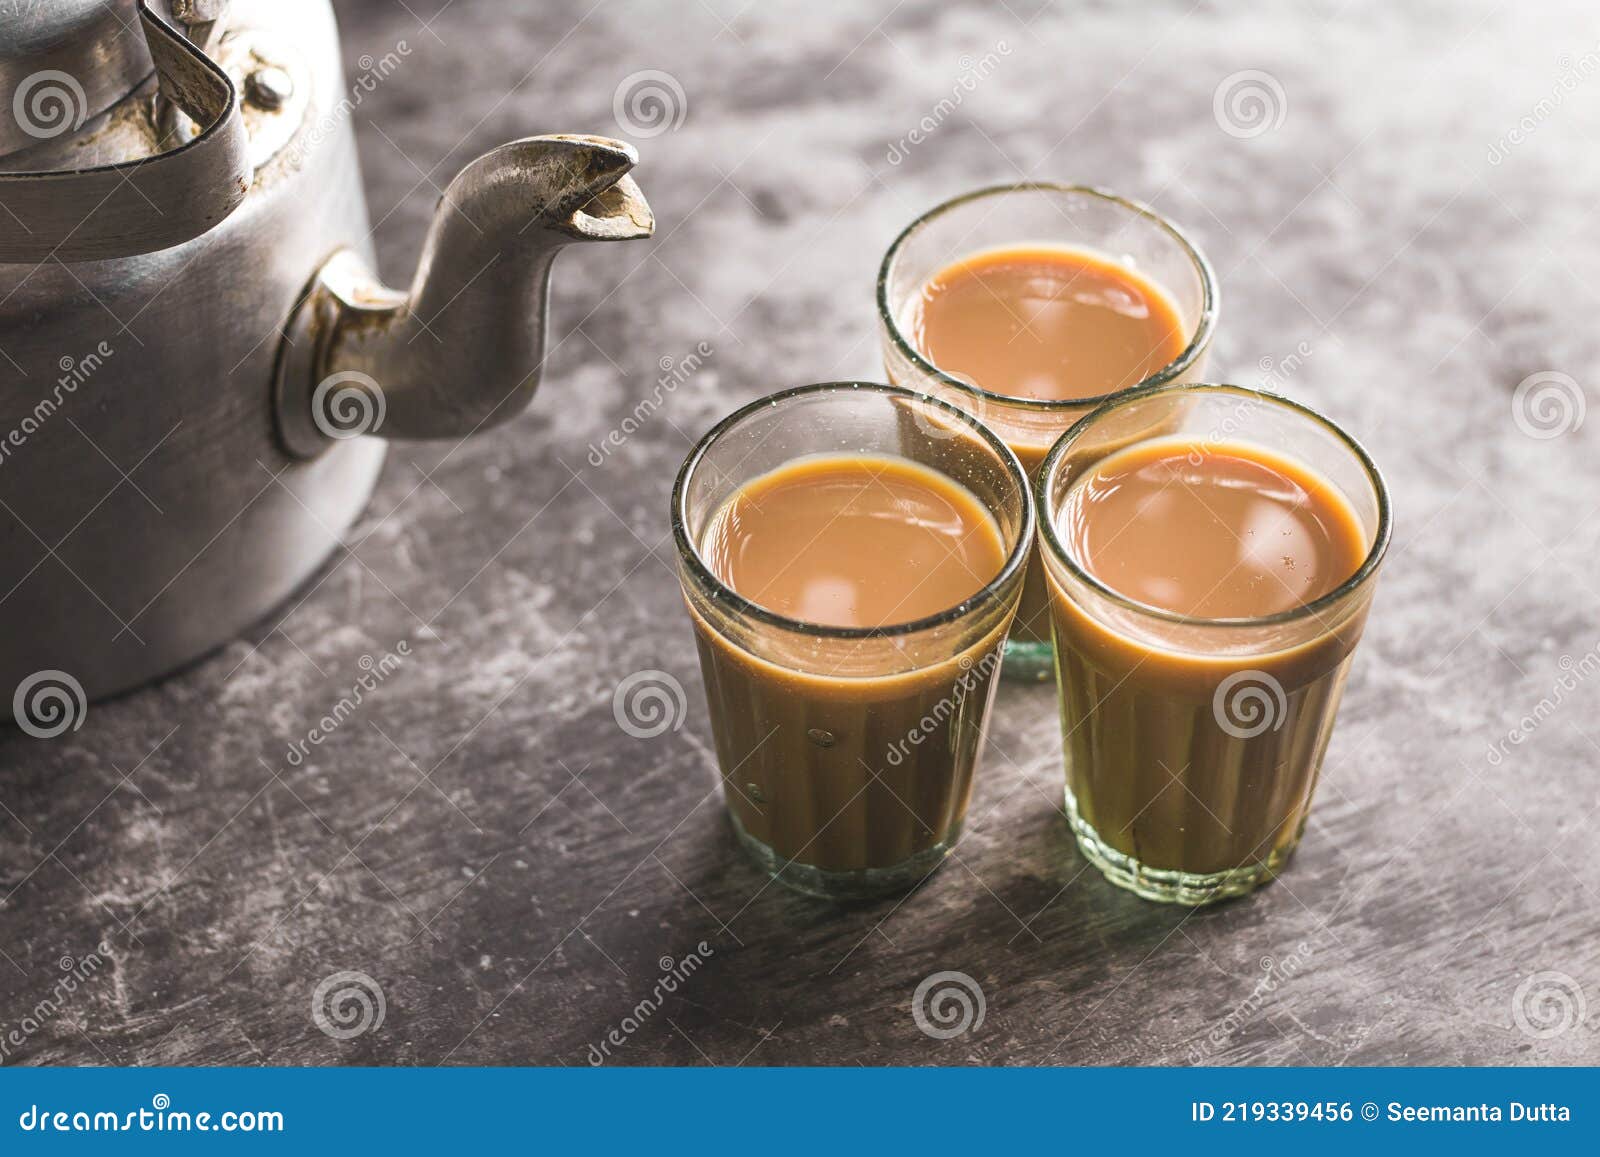 Indian chai in glass cups with masalas to make the tea. Stock